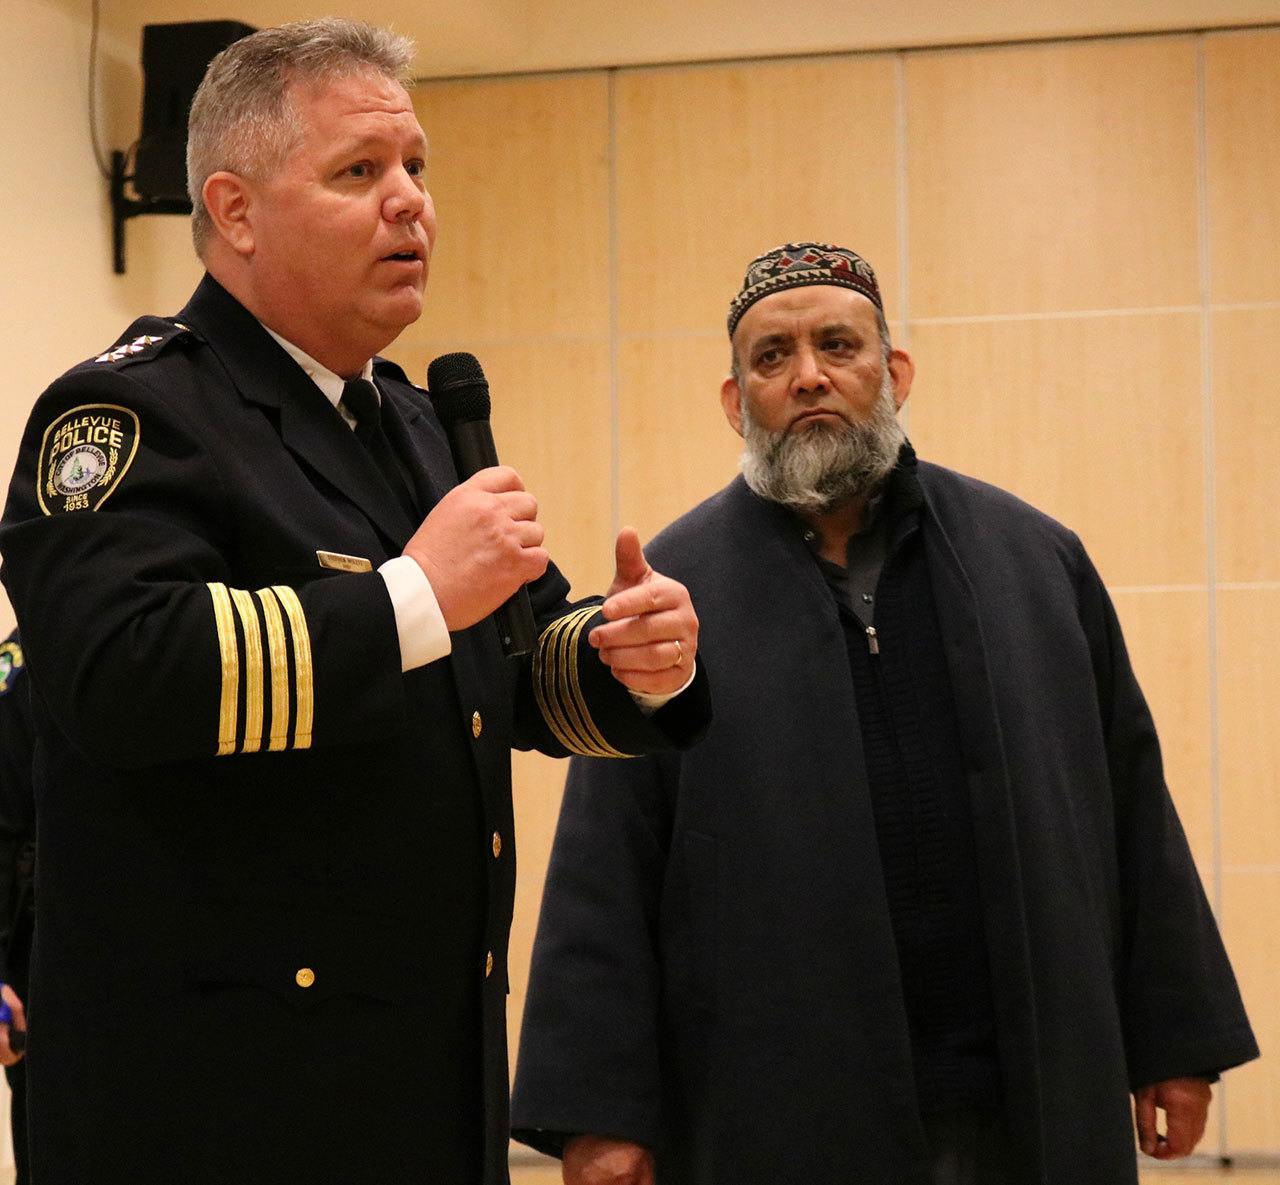 Bellevue Police Department Chief Steven Mylett interacts with Imam Sheikh Fazal of the Islamic Center of Eastside during the Eastside Muslim Safety Forum. ANDY NYSTROM, Redmond Reporter